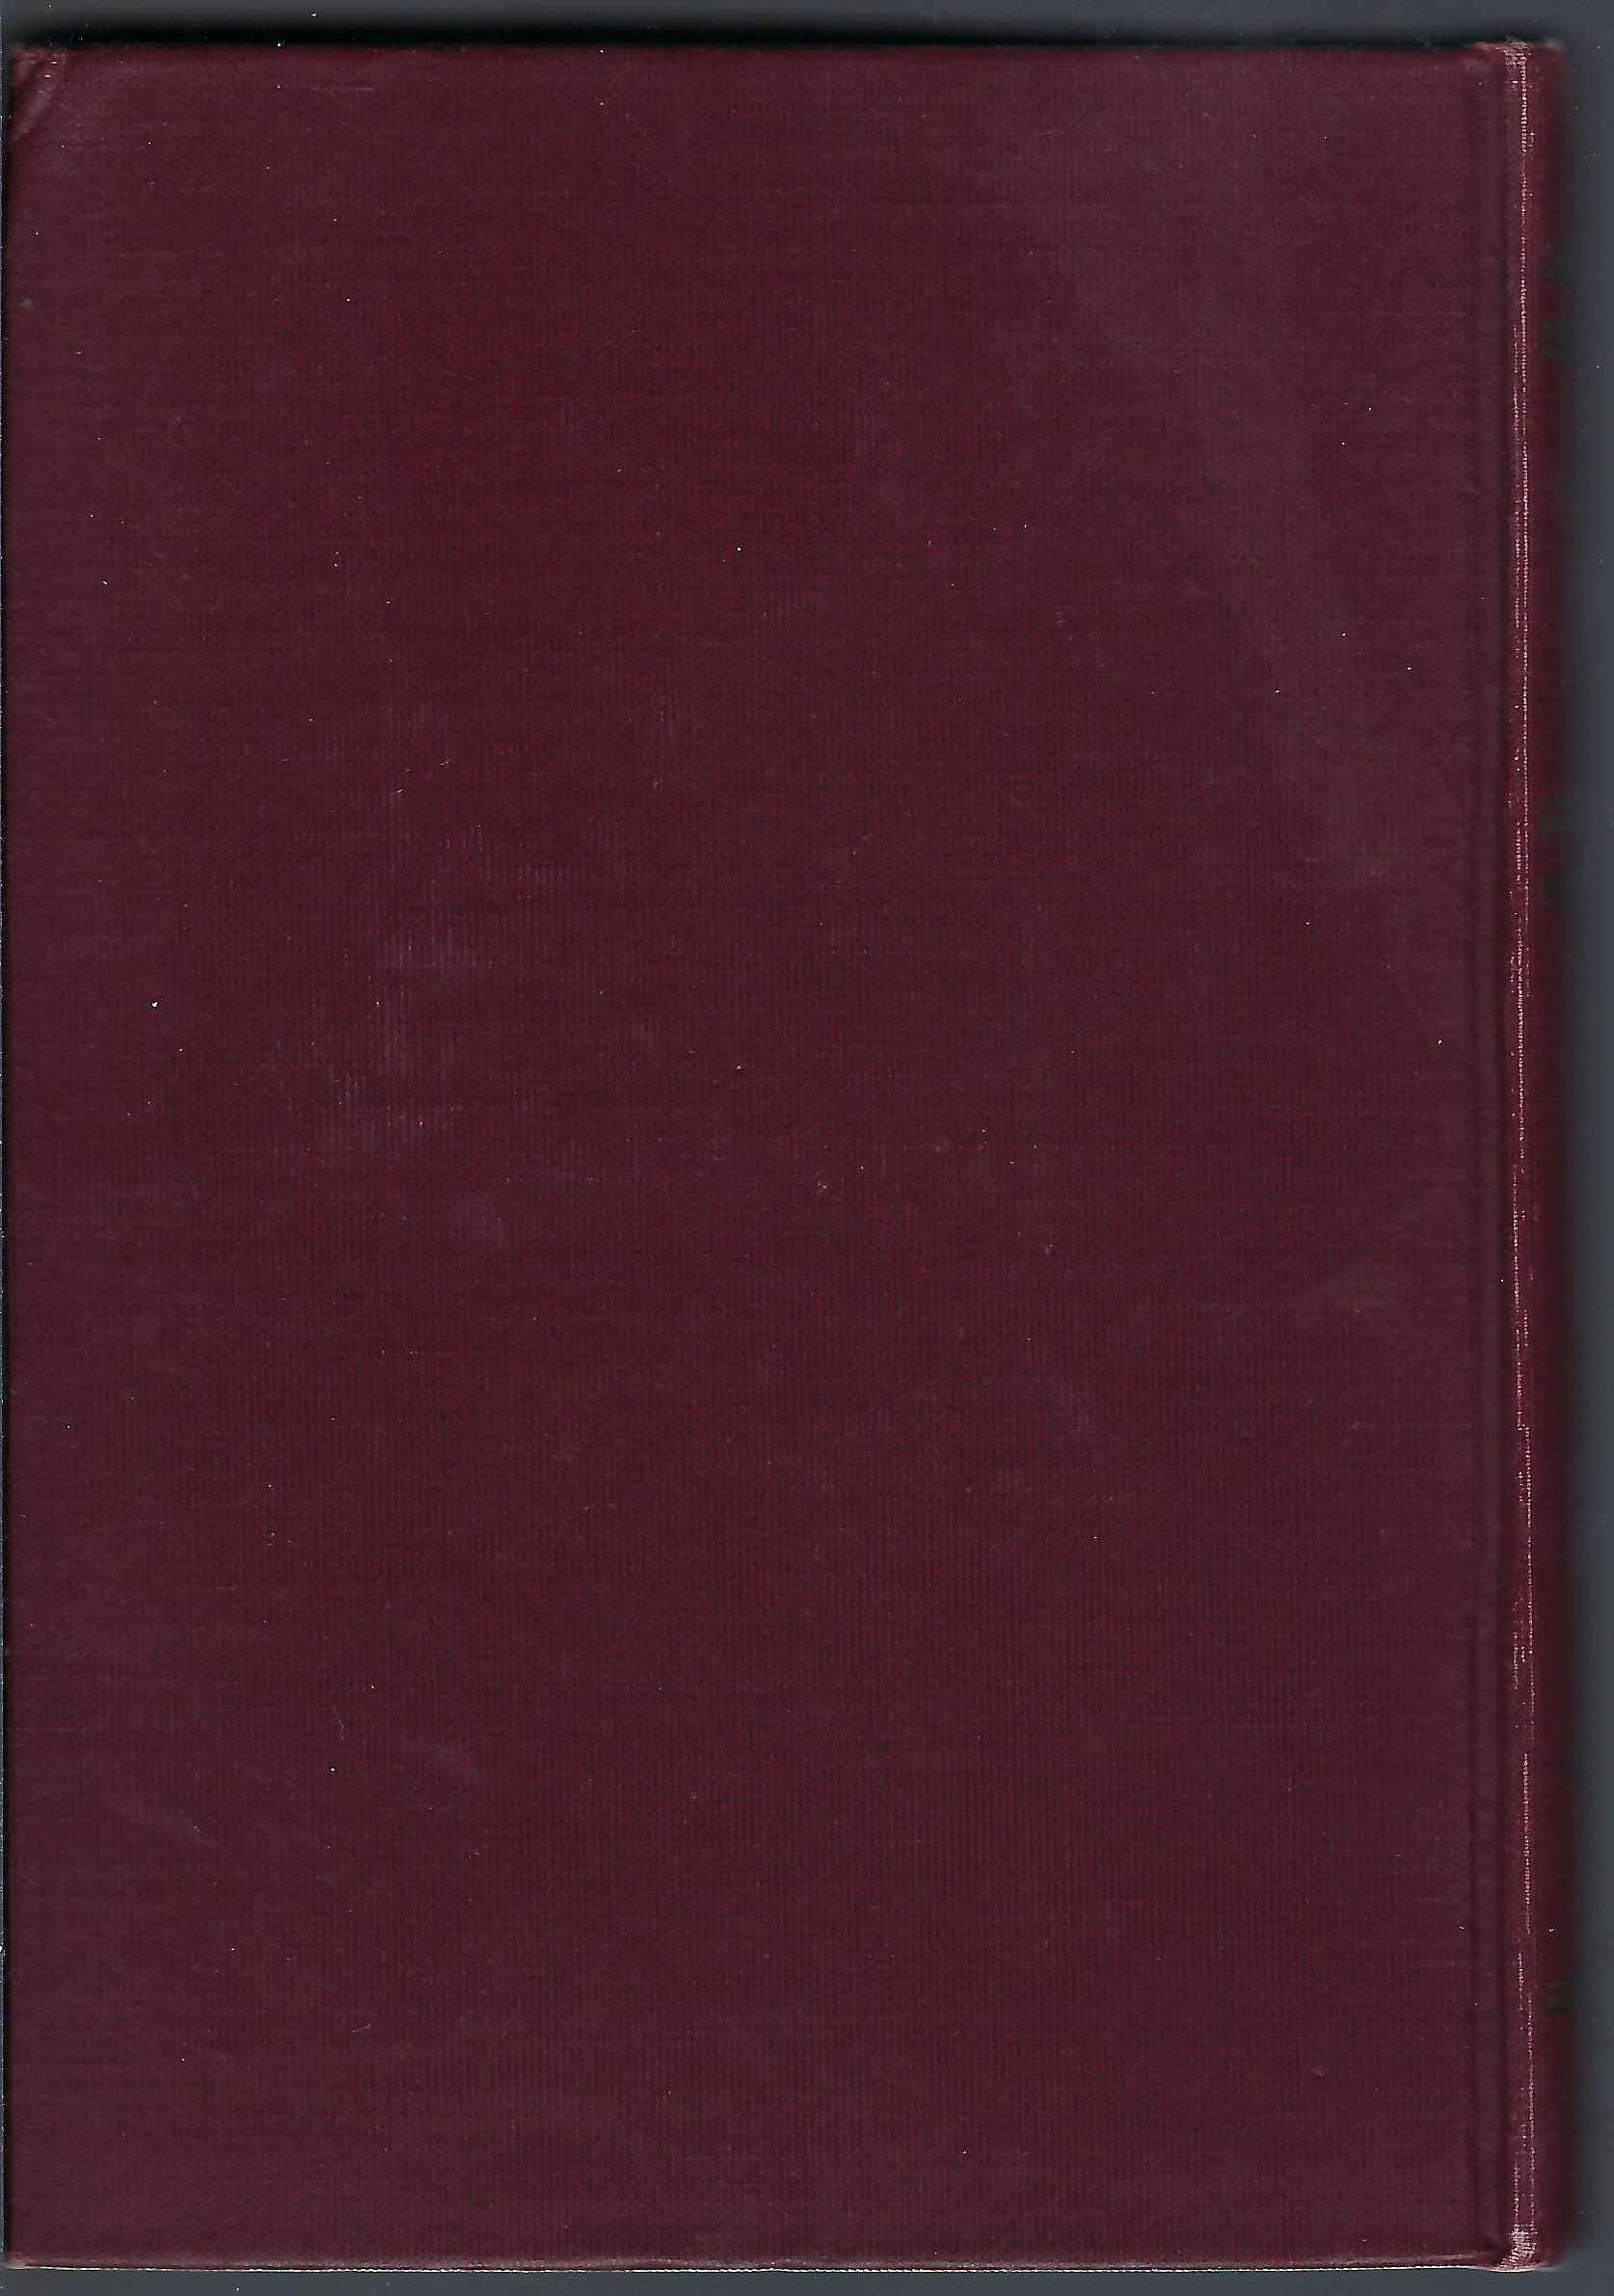 Whirligigs rear cover